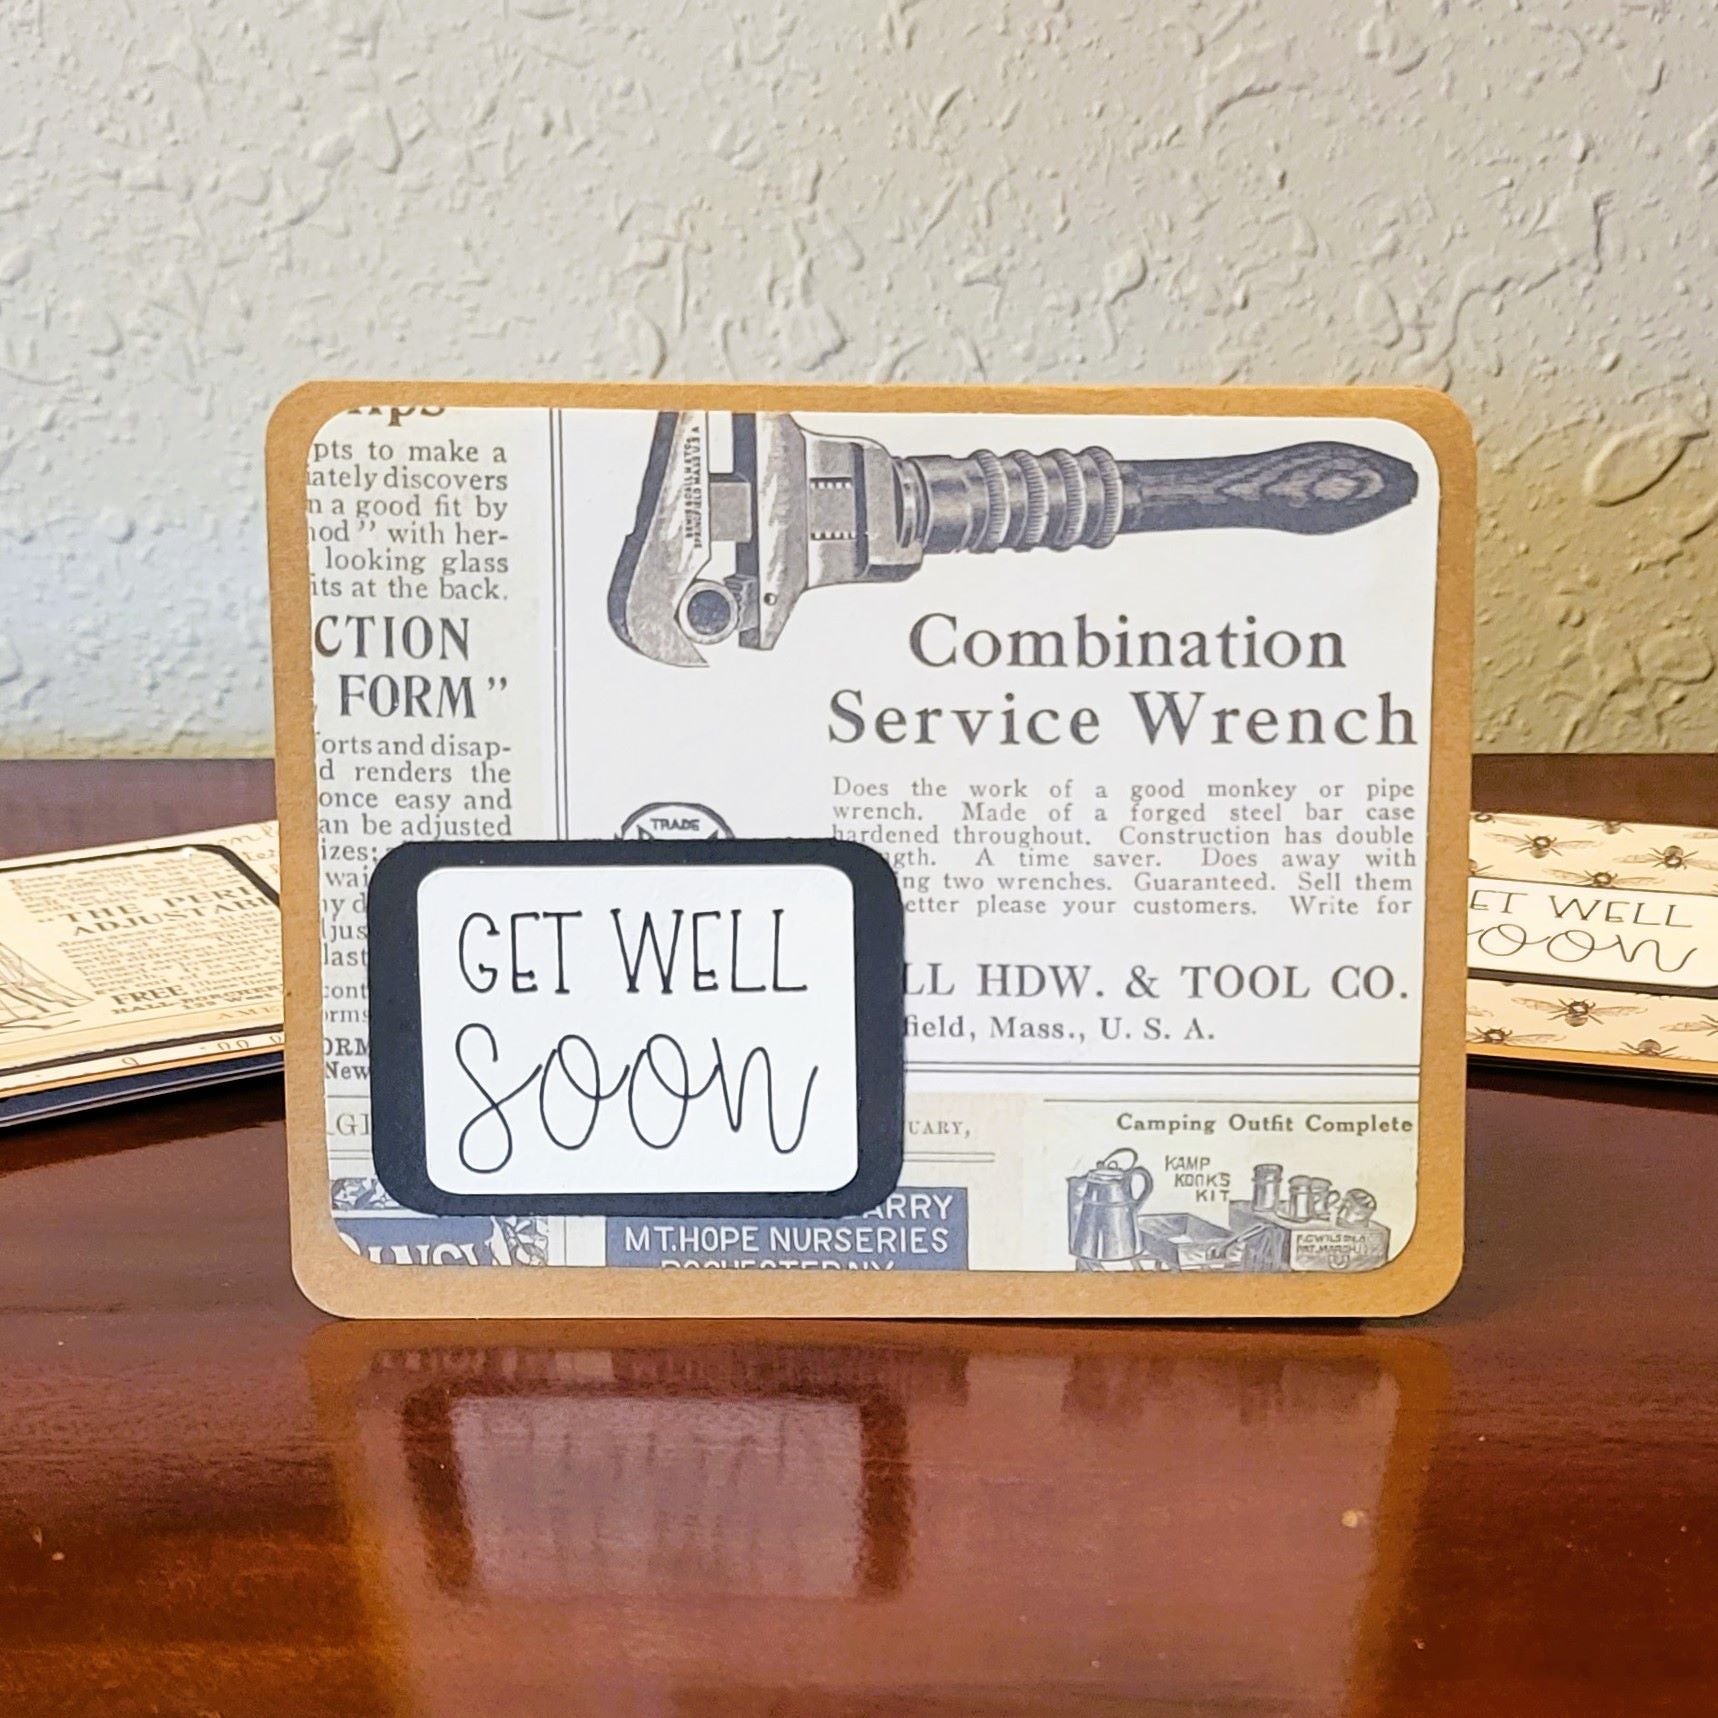 Get Well Soon, Vintage Newspaper - Be Well Collection - Handmade Greeting Card - 31 Rubies Designs